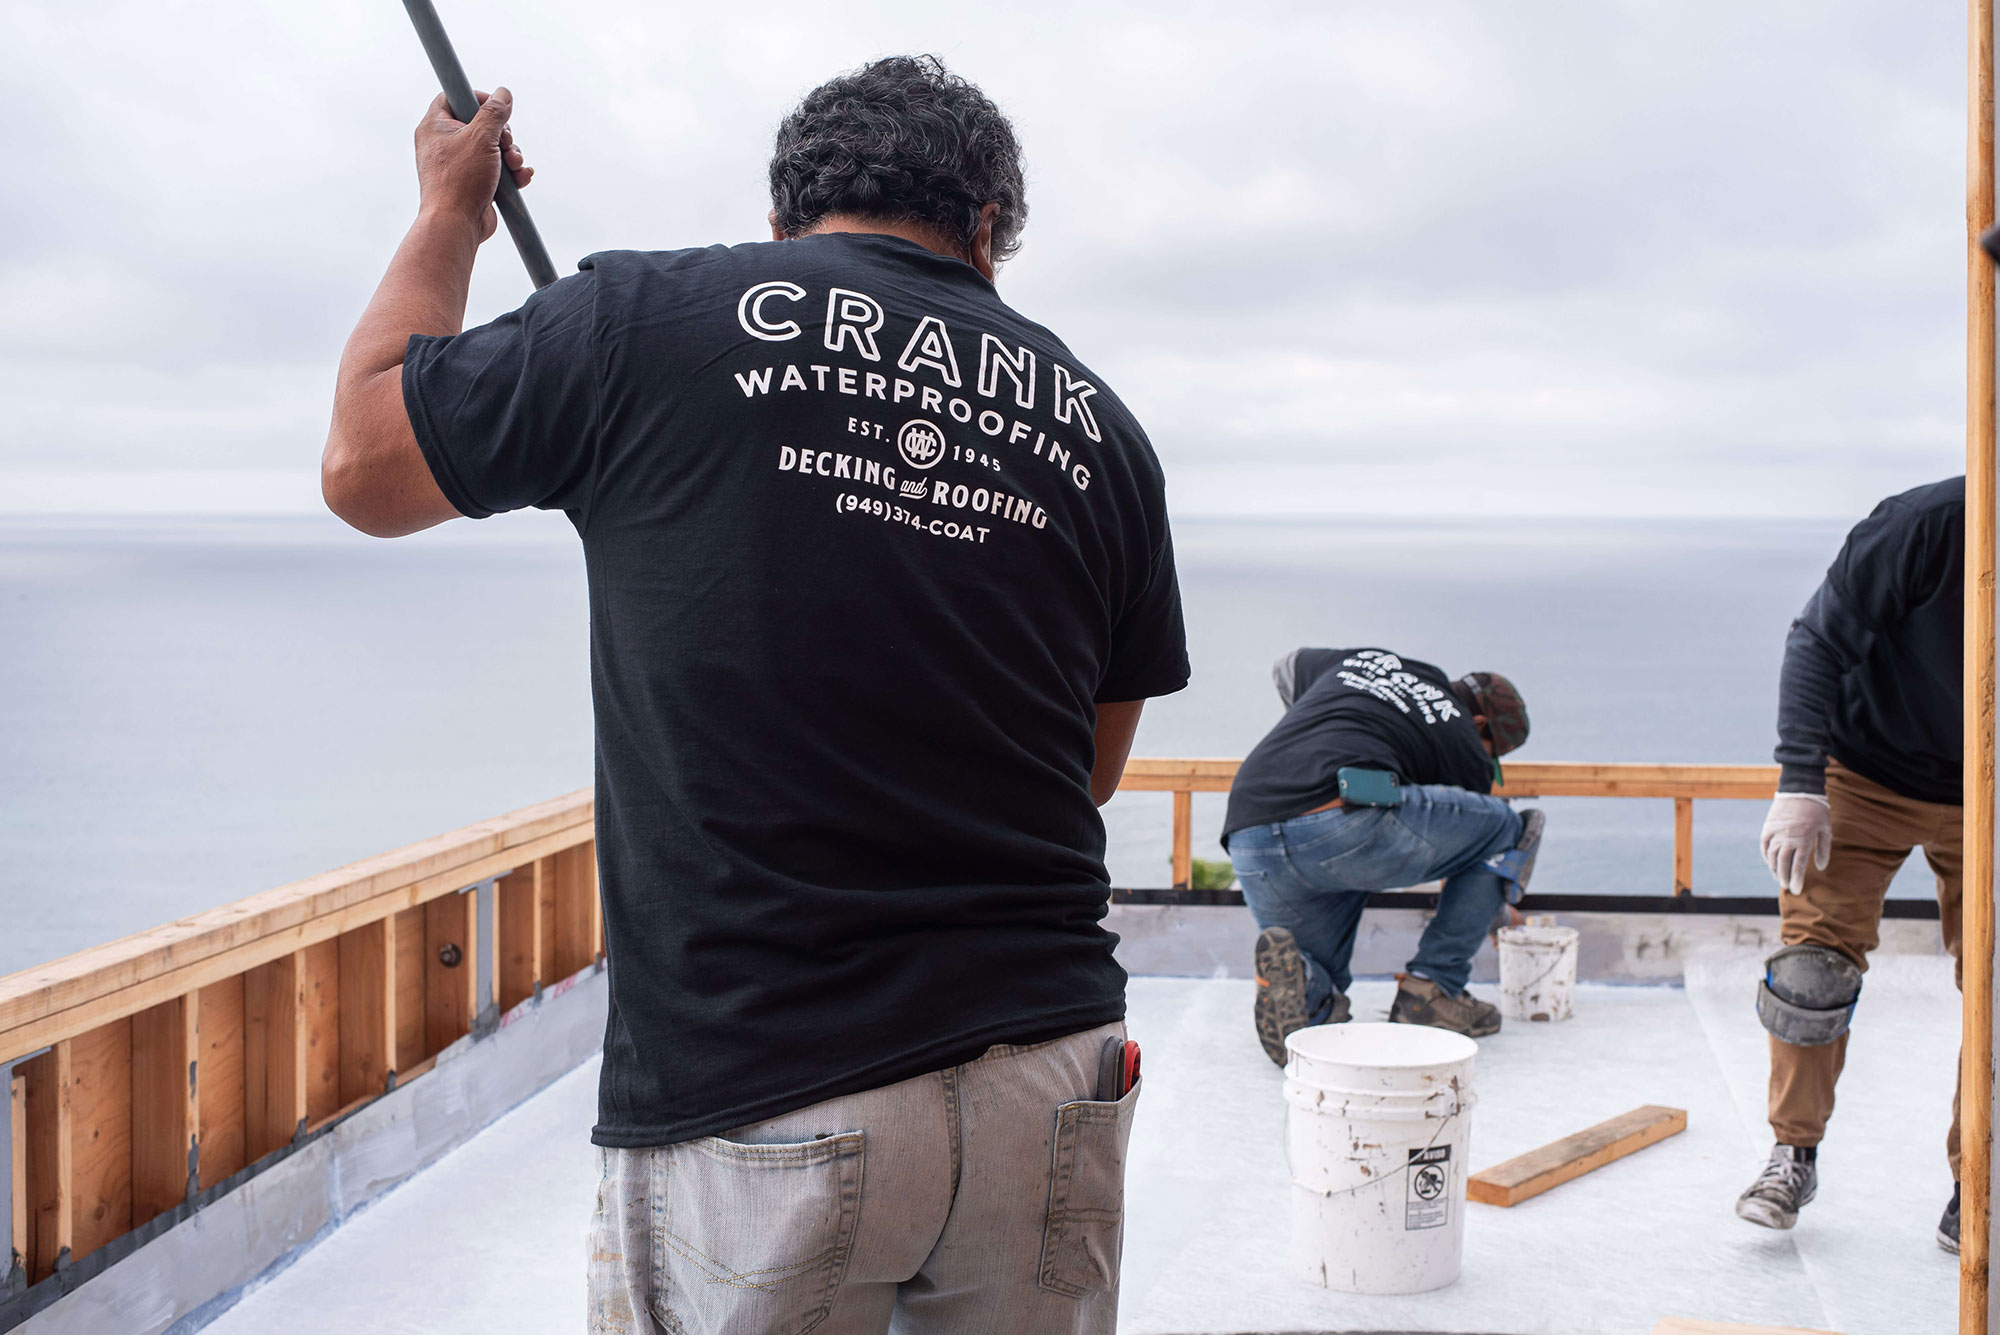 men rolling flat roofs coating to building by the ocean